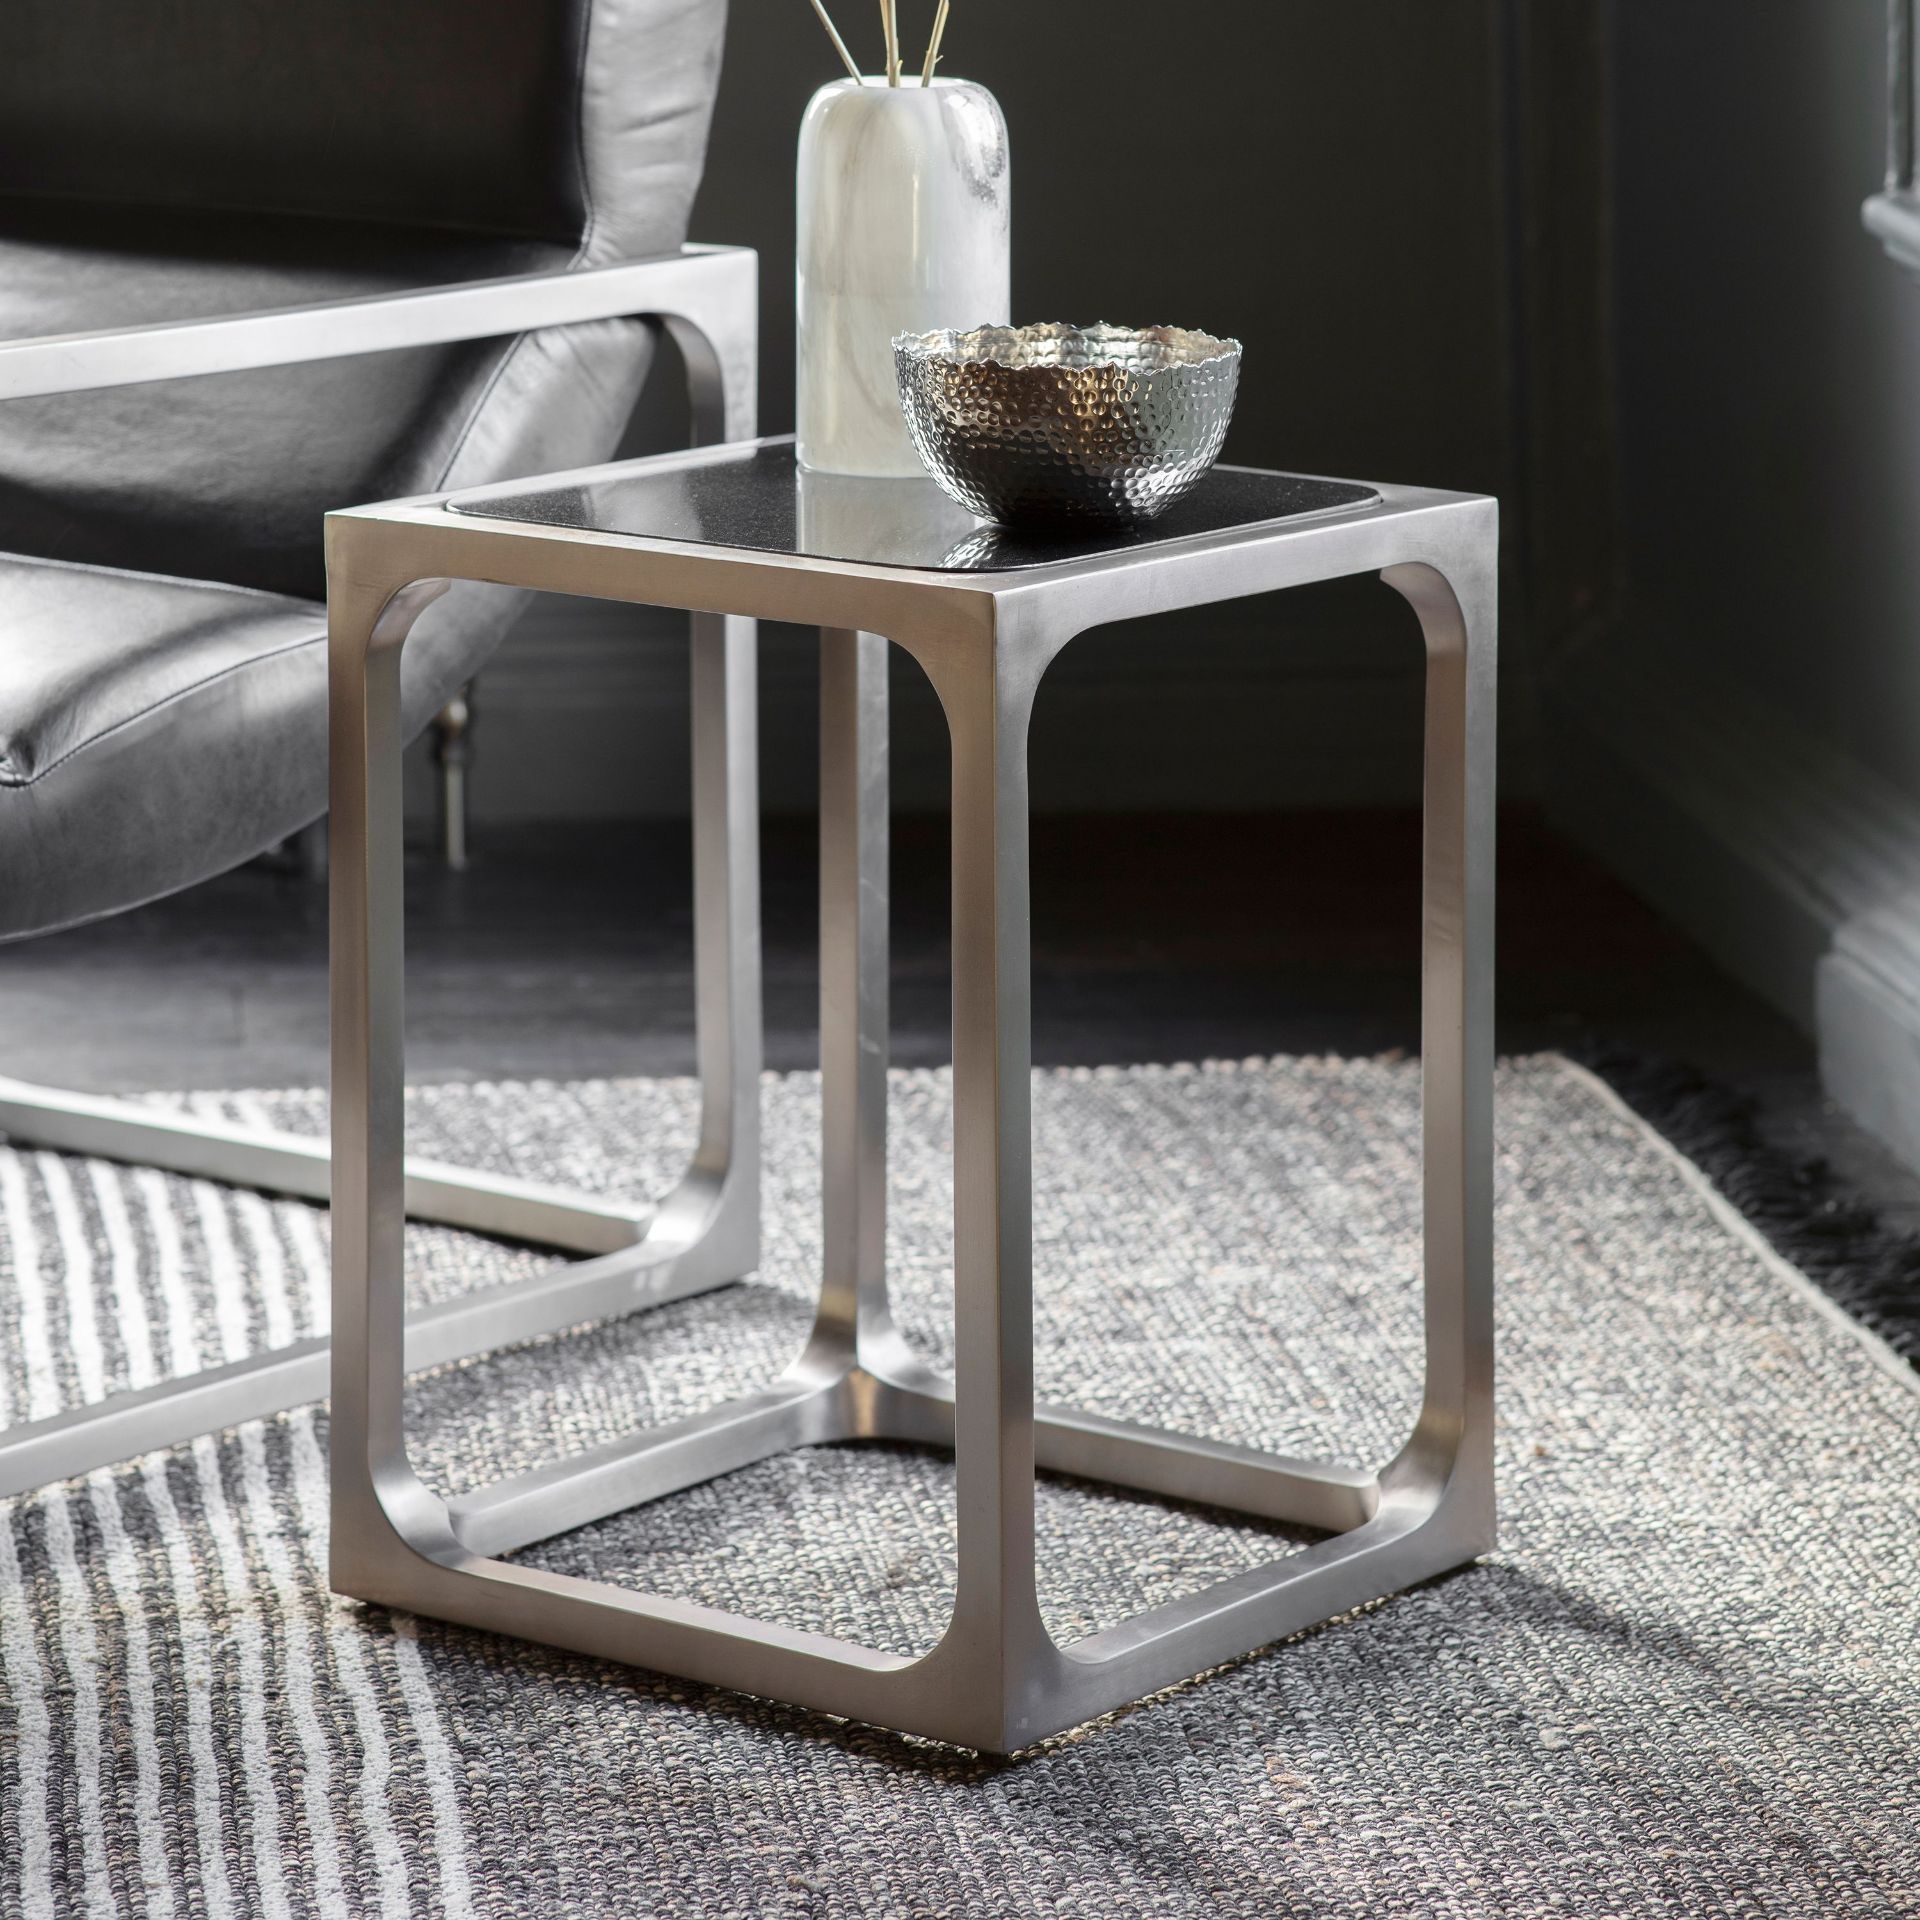 Roma Side Table in Pewter is a visually arresting piece that is perfect for any room if you want